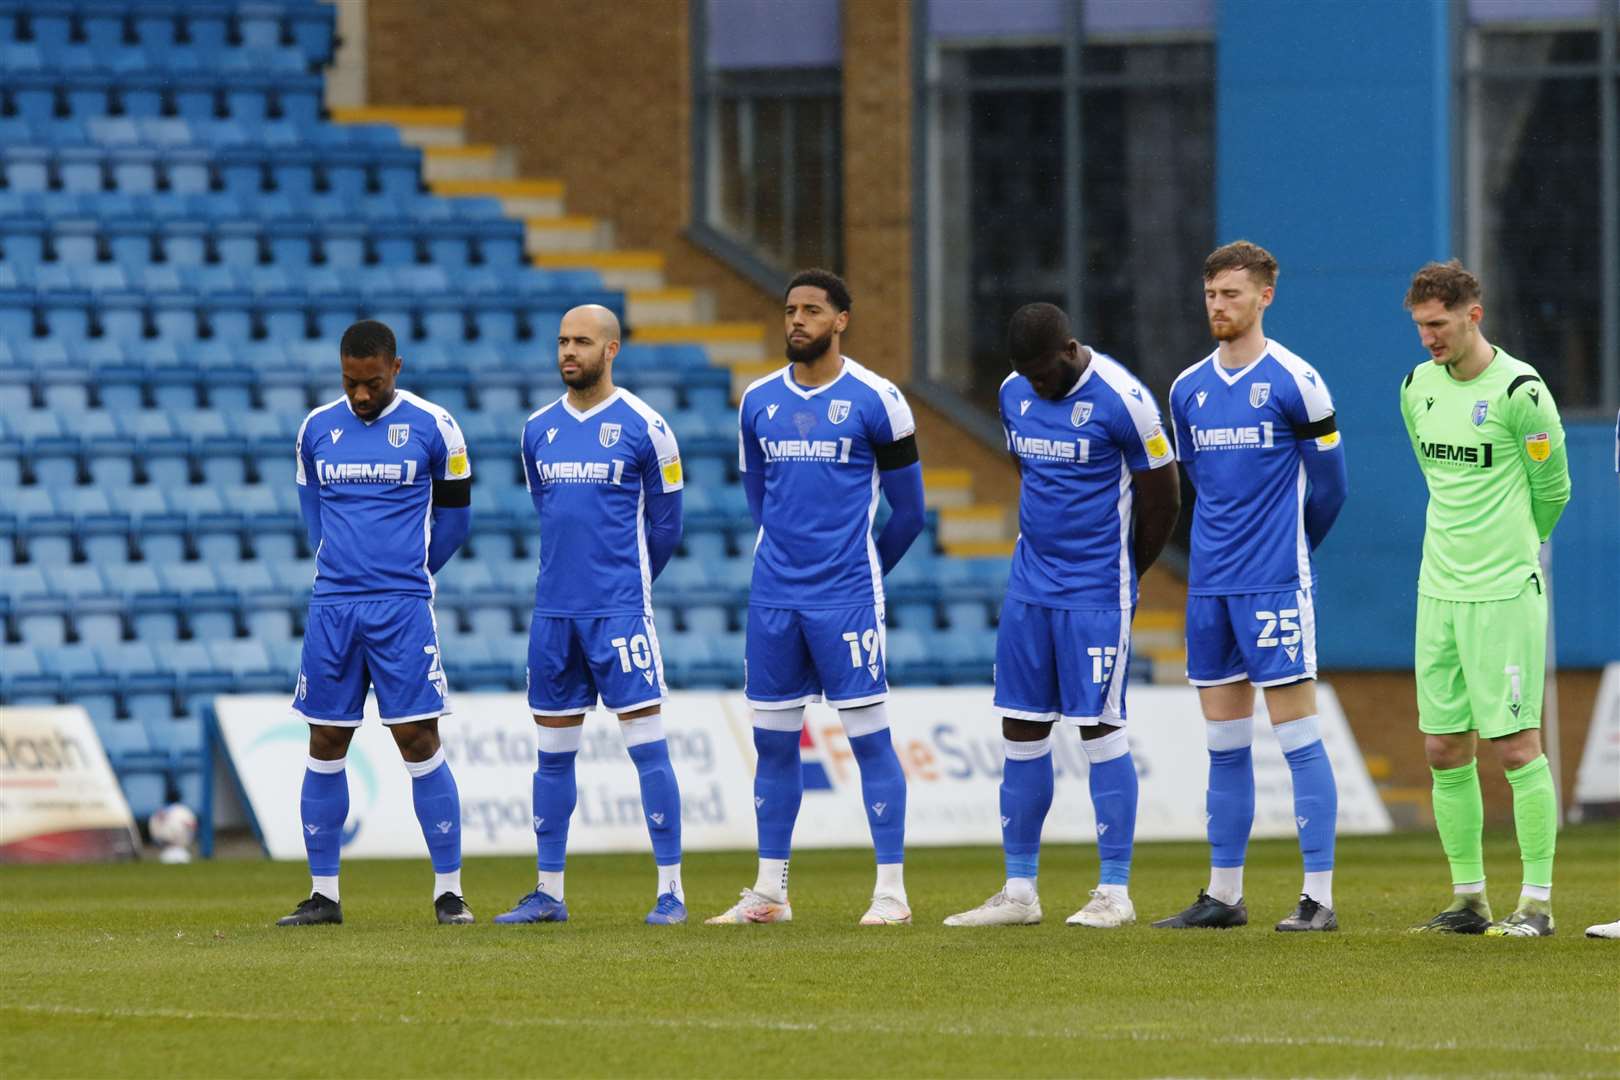 Gillingham players during a two minute silence for HRH Prince Philip before kick off against Shrewsbury Picture: Andy Jones